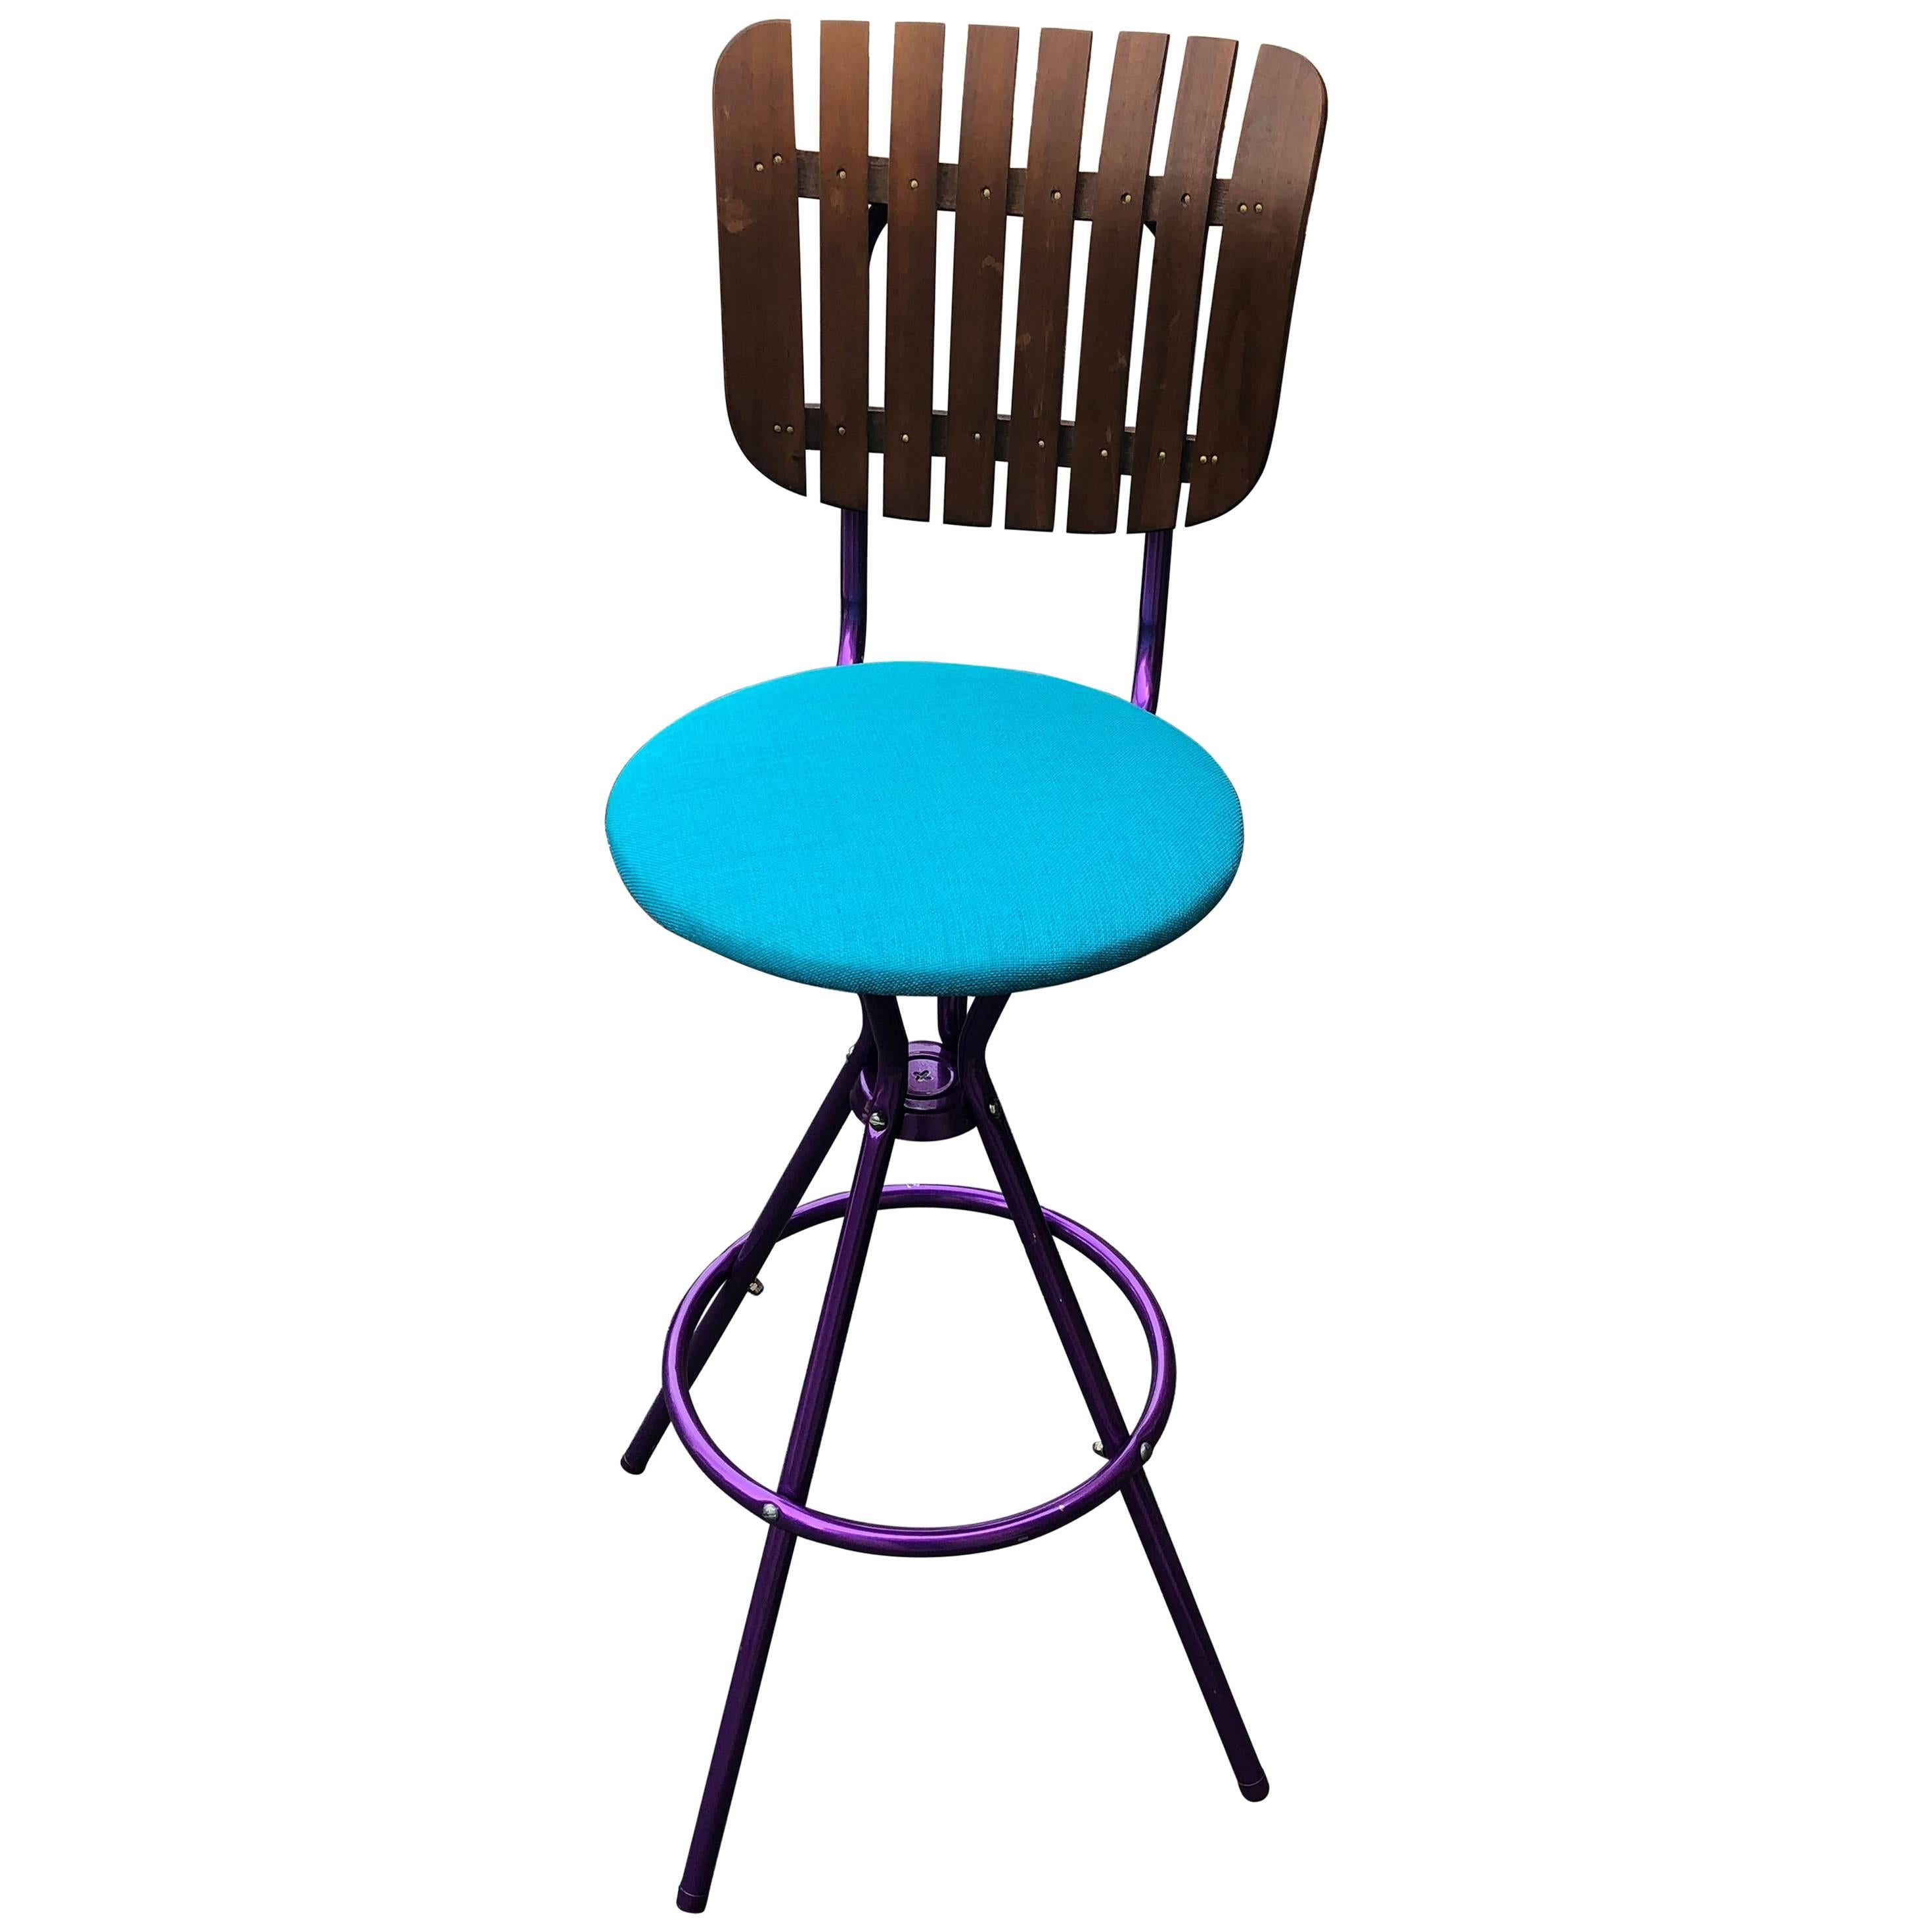 Violet Mid-Century Modern Arthur Umanoff style bar stool with wooden back support.
Newly upholstered and powder-coated in a vibrant ultra violet paint.
The seat height is 28 inches
  